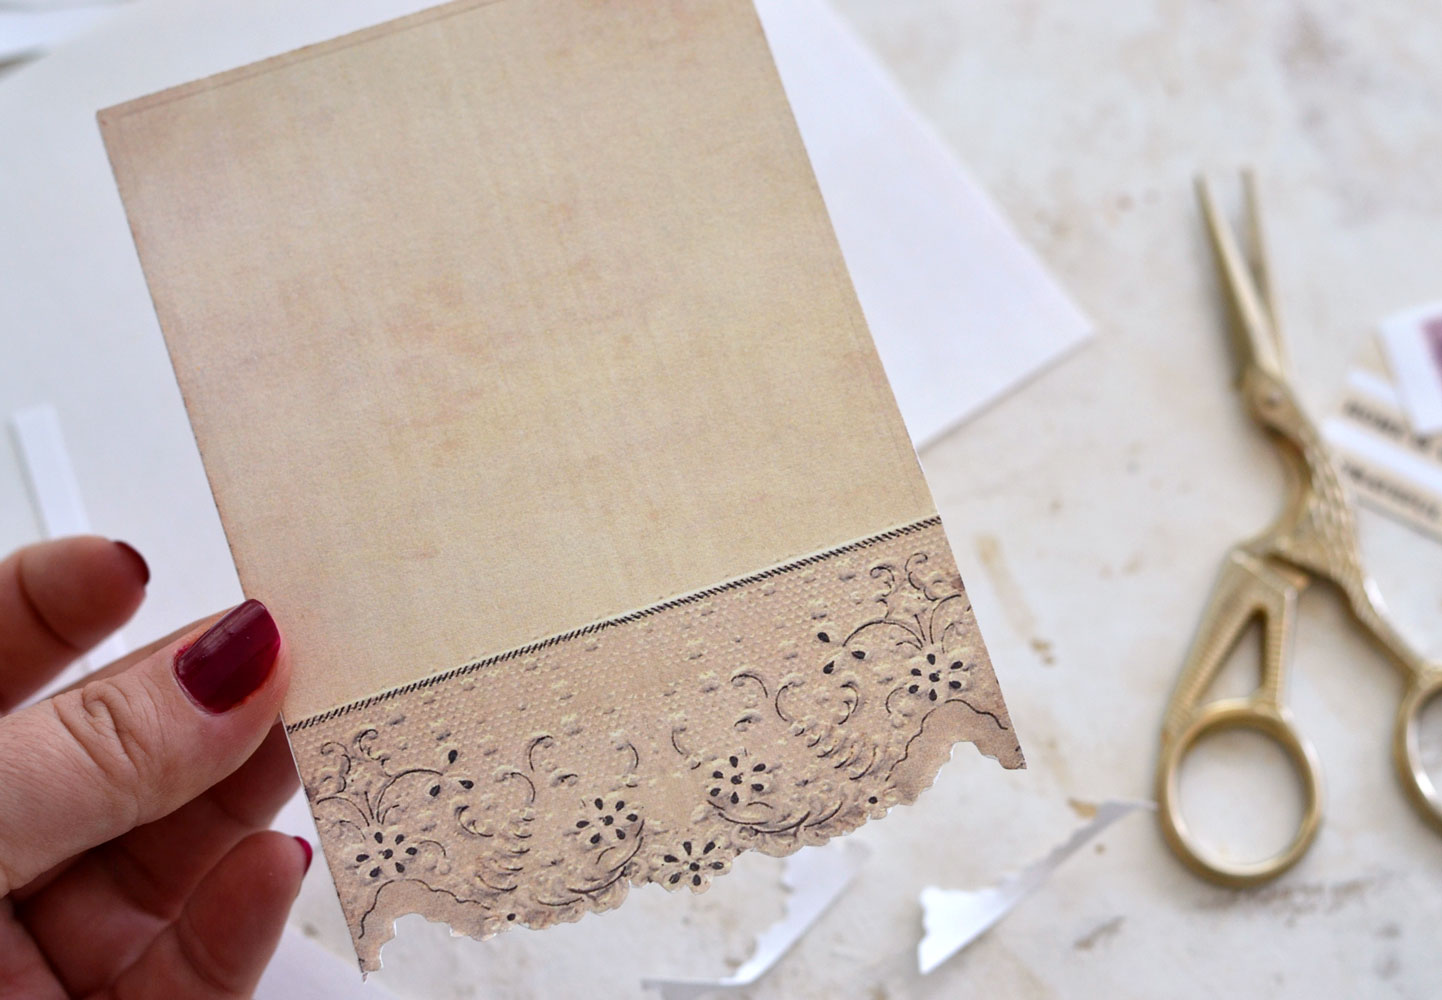  cutting arround the lace